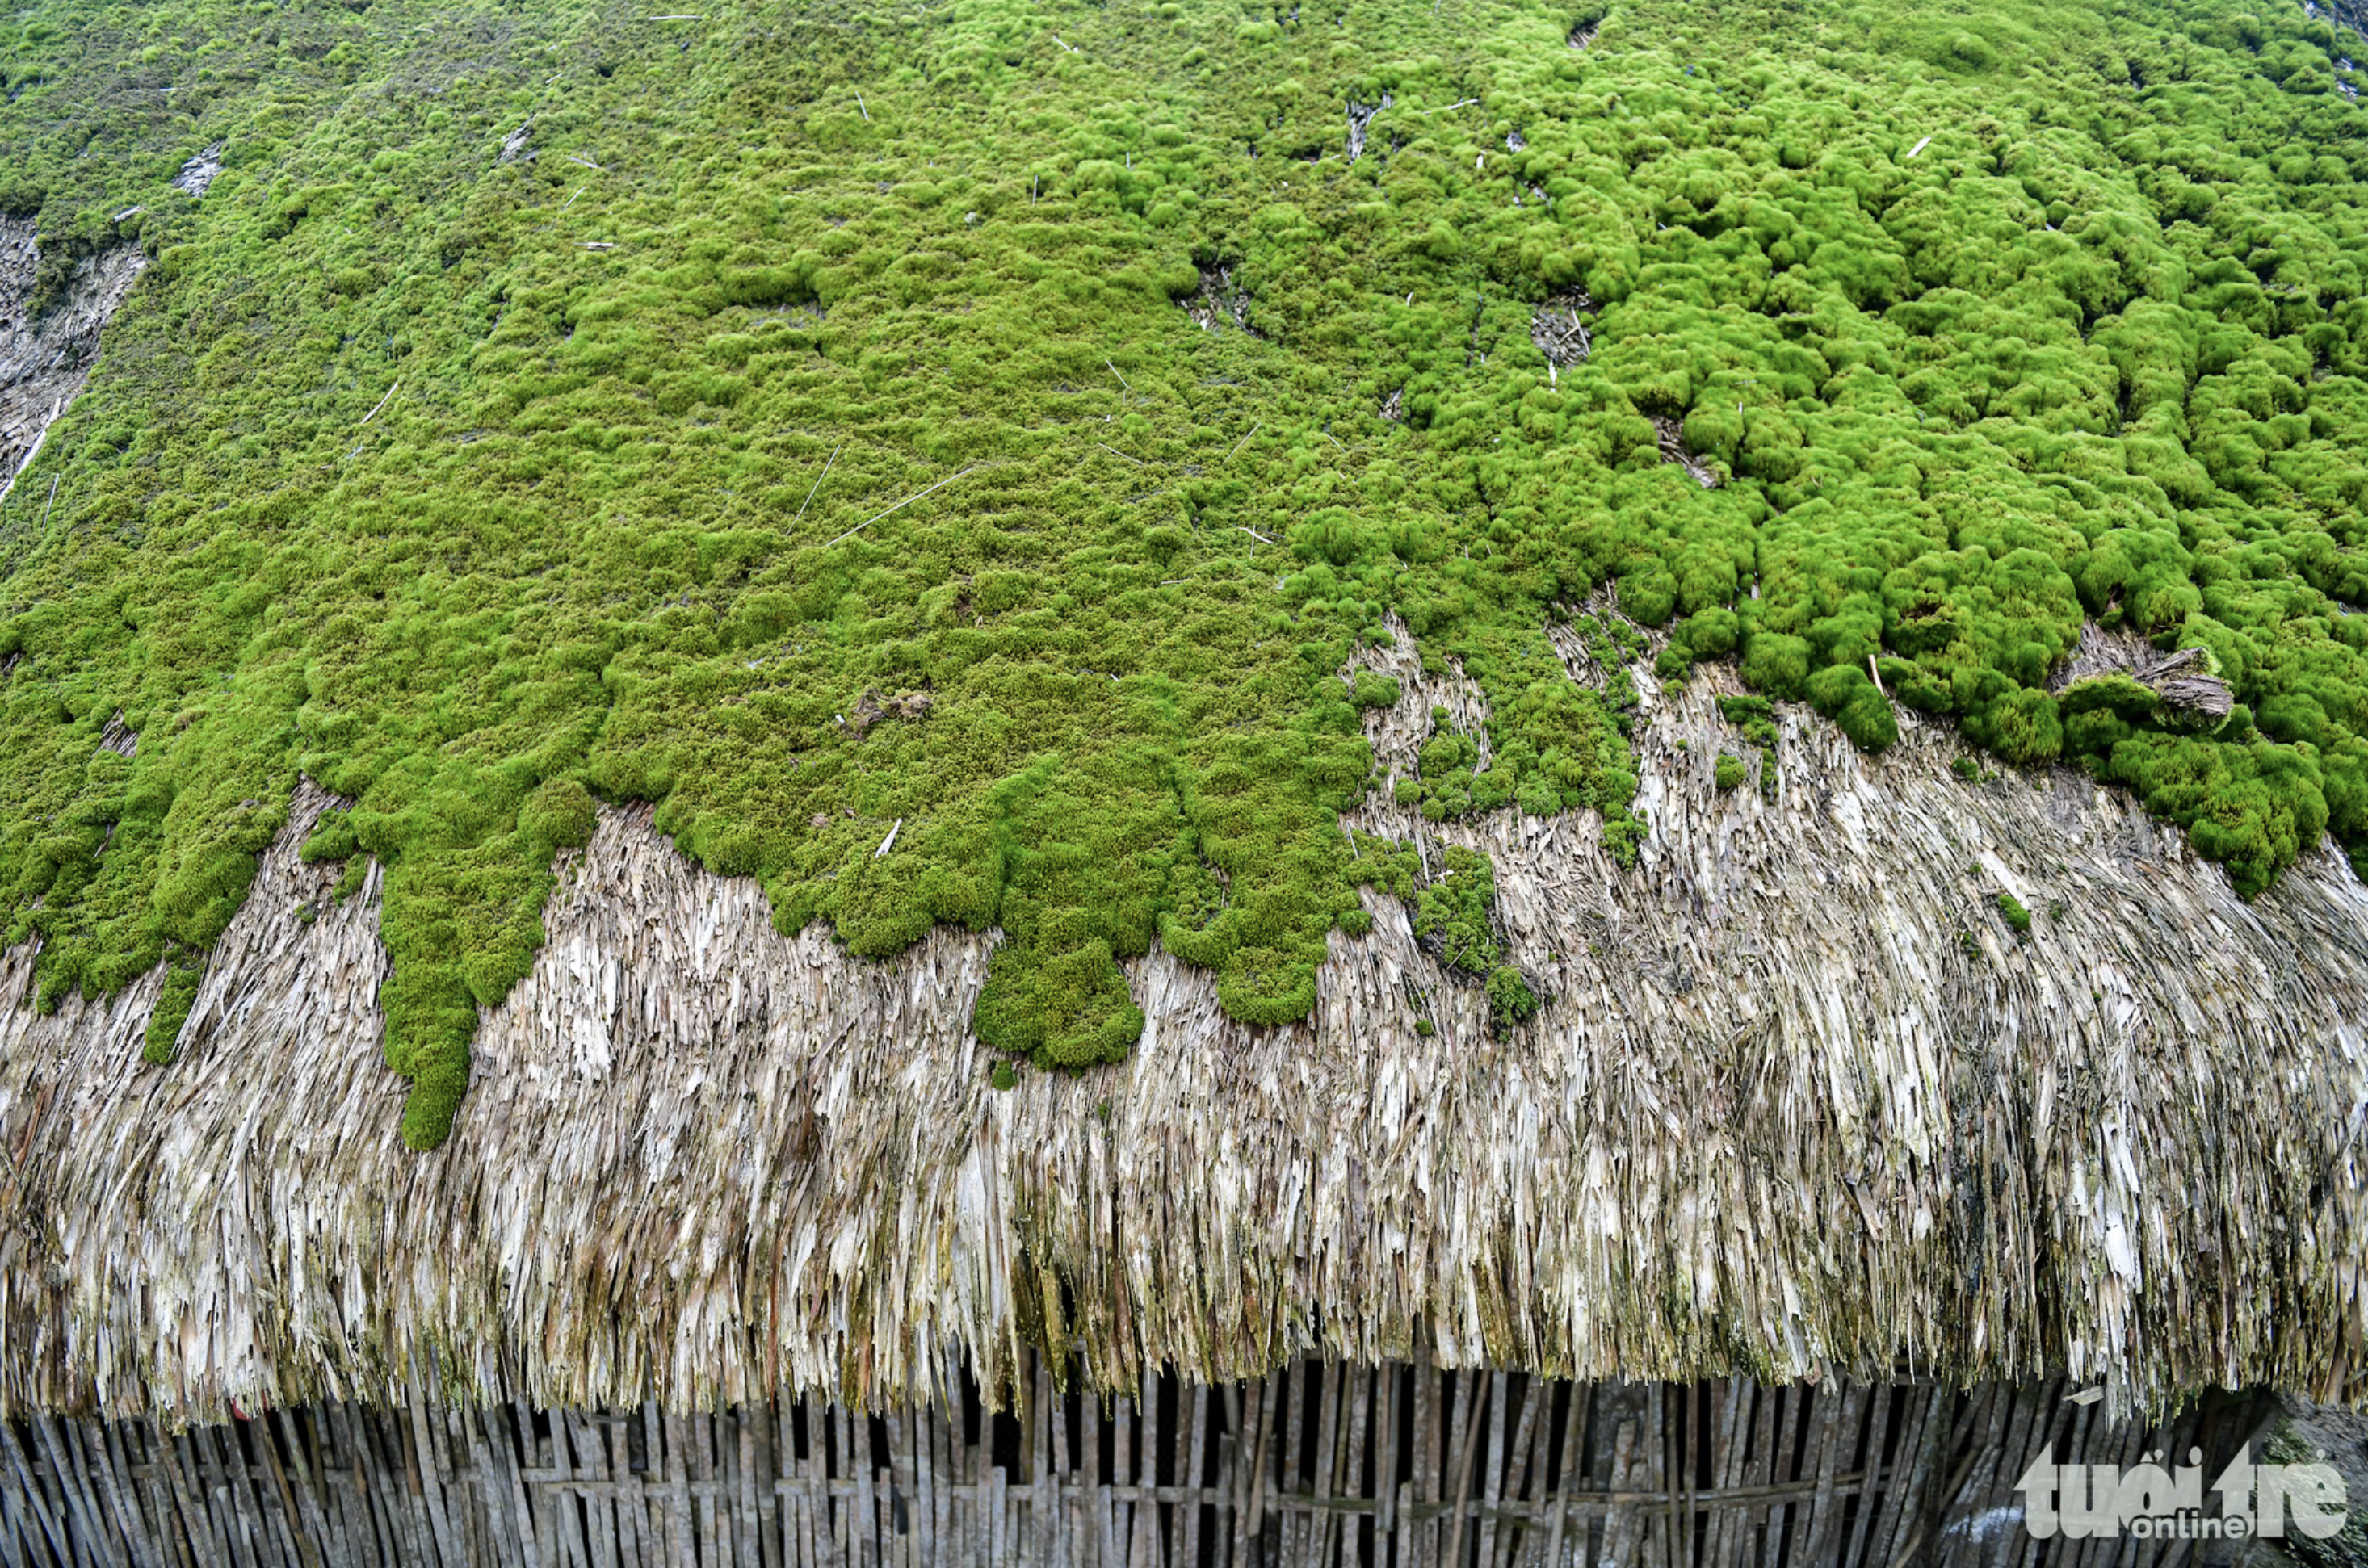 The roofs of stilt houses aged seven or older in Xa Phin Mountainous Village in Vi Xuyen District under Ha Giang Province, northern Vietnam become covered with moss. Photo: Nam Tran / Tuoi Tre